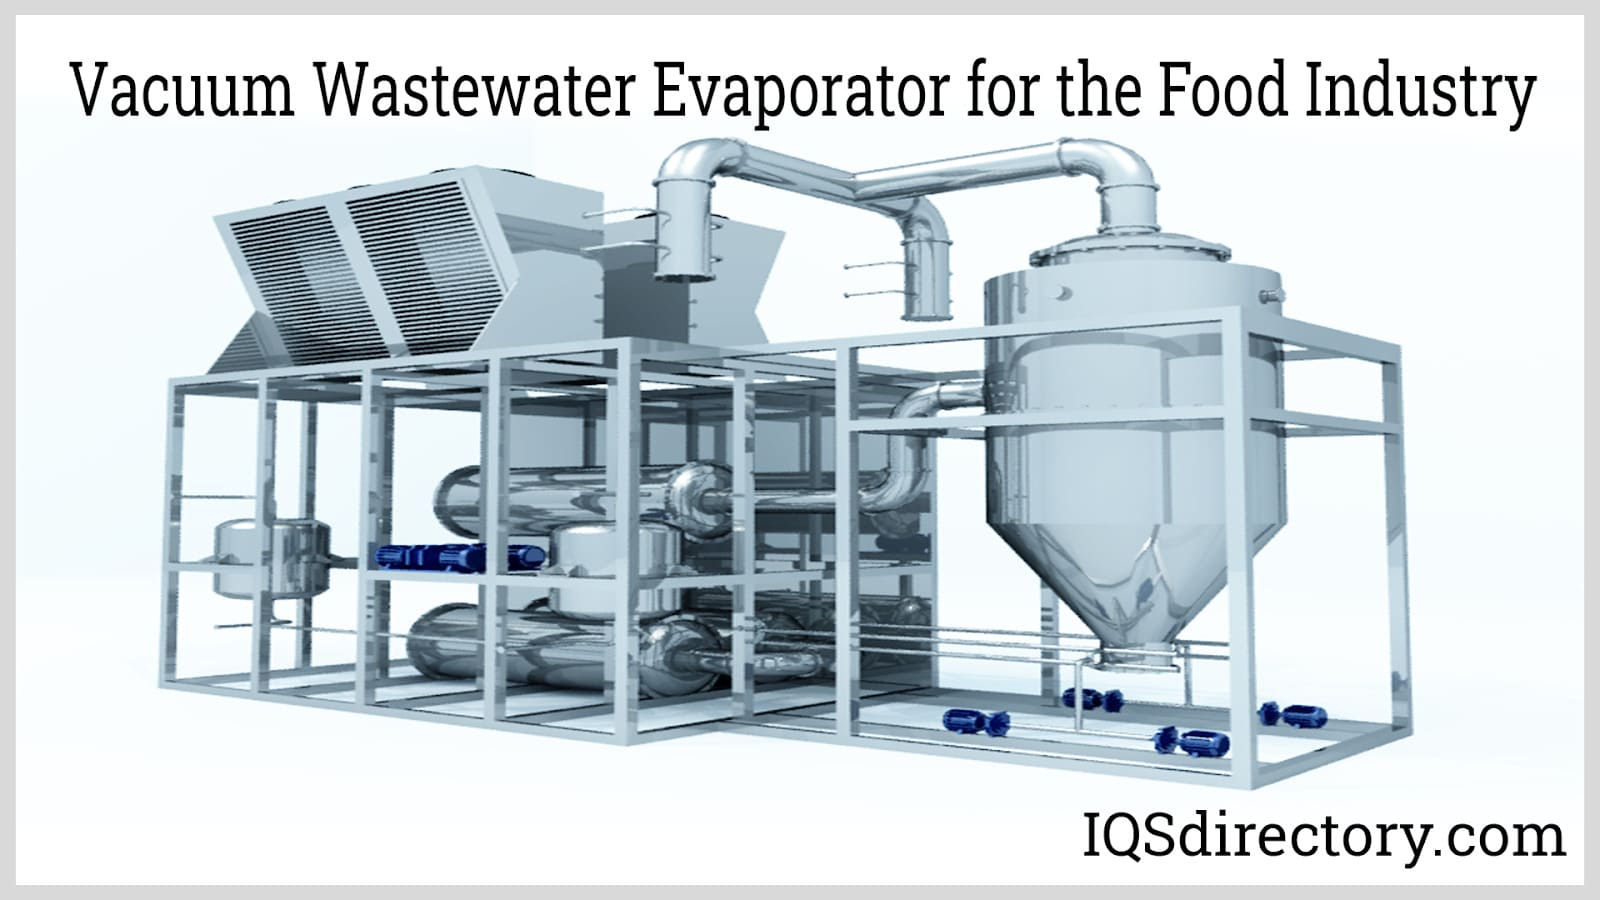 Vacuum Wastewater Evaporator for the Food Industry